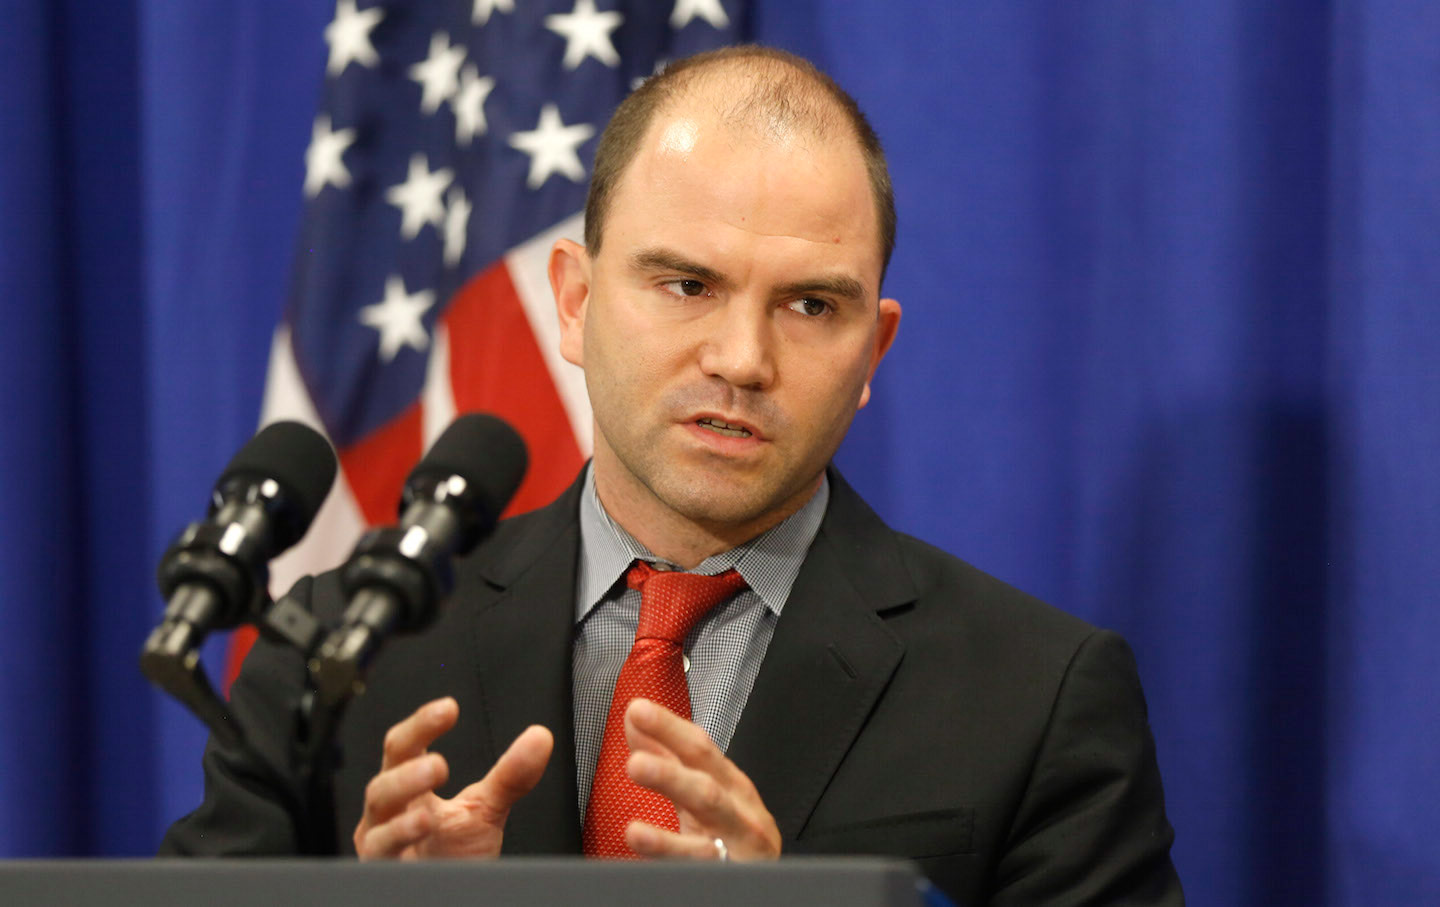 ‘There’s a Lot of New Ground for Democrats to Fight Over’: A Q&A With Ben Rhodes